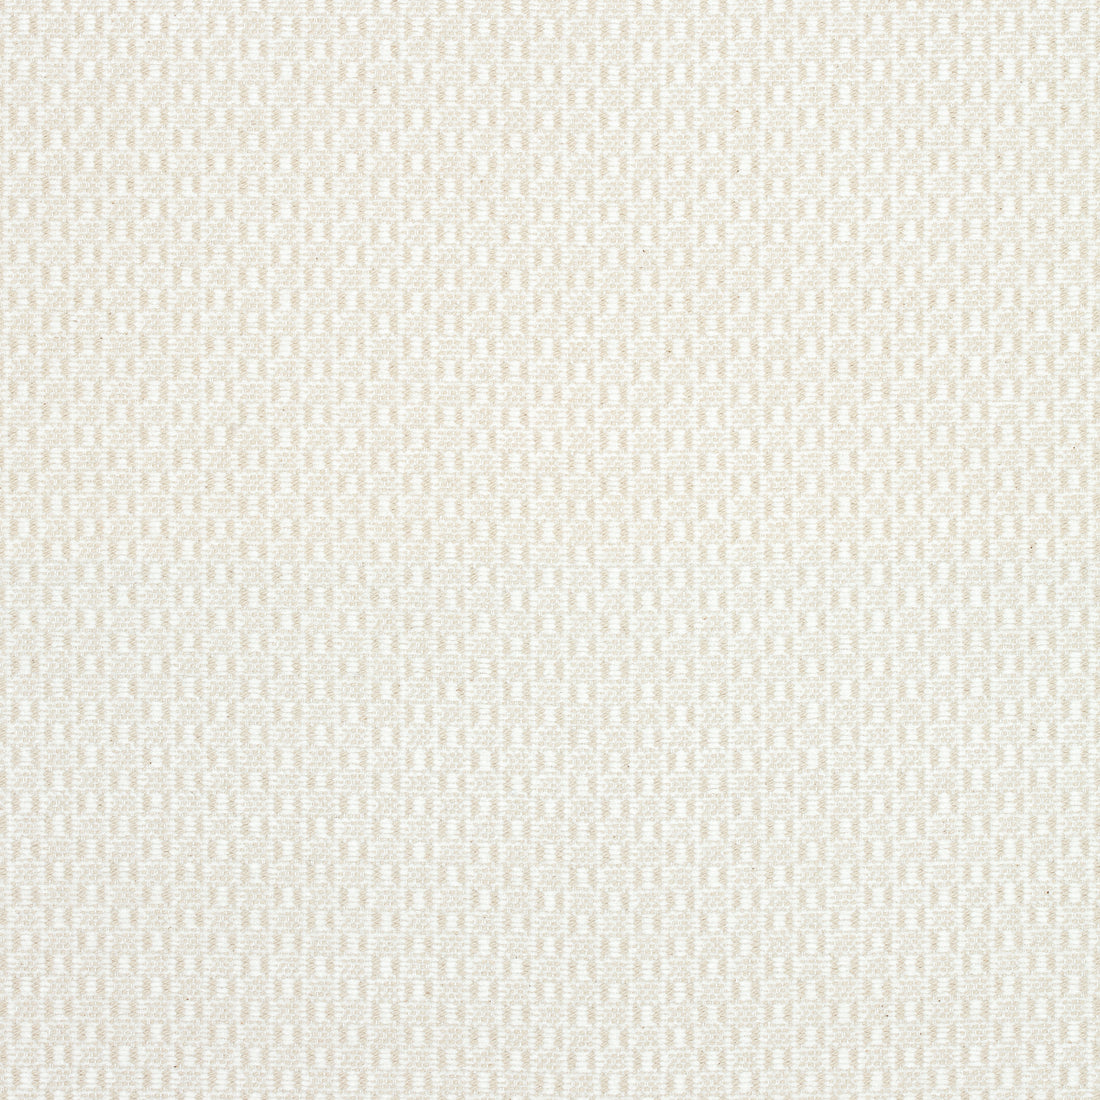 Emilie fabric in almond color - pattern number W789138 - by Thibaut in the Reverie collection